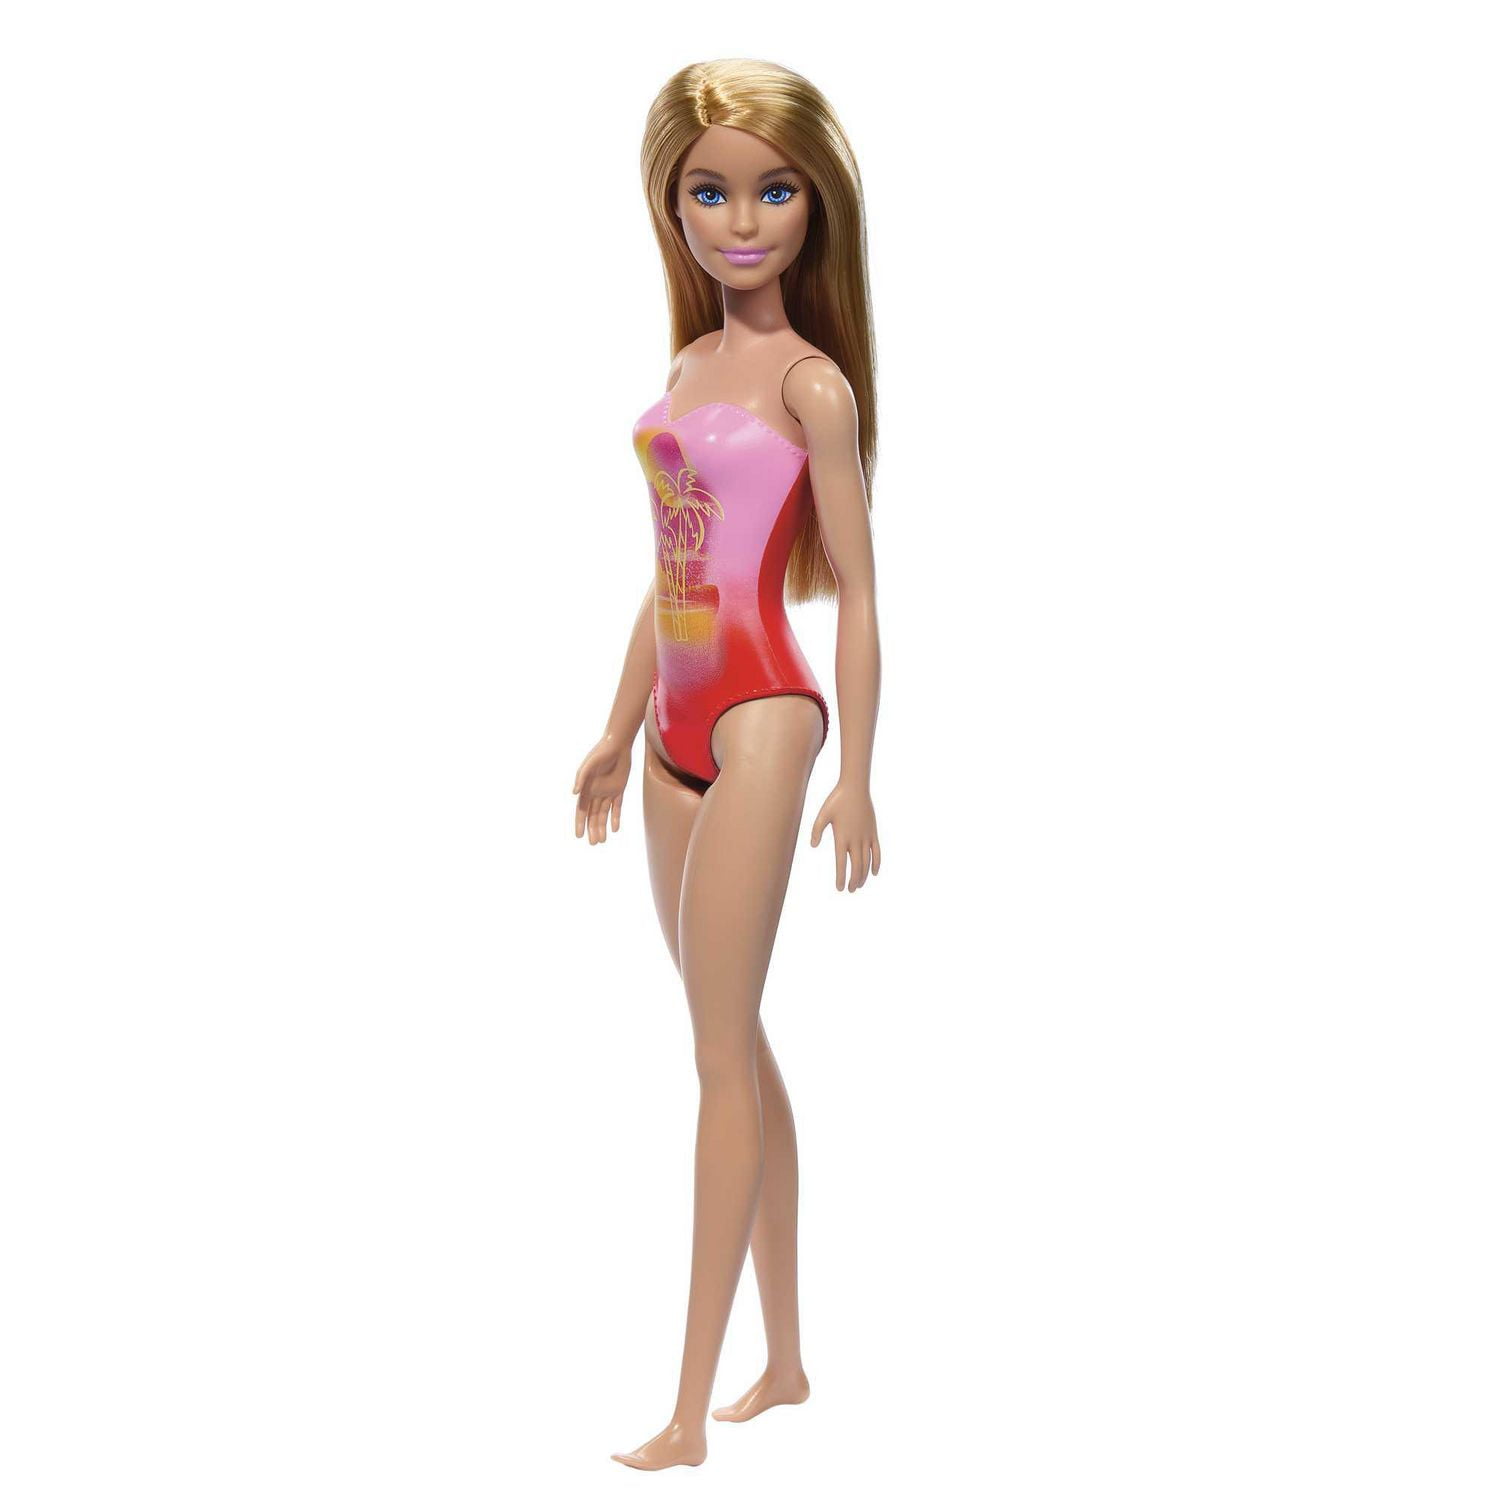 Beach Barbie Doll with Blond Hair Wearing Pink Palm Tree-Print Swimsuit 